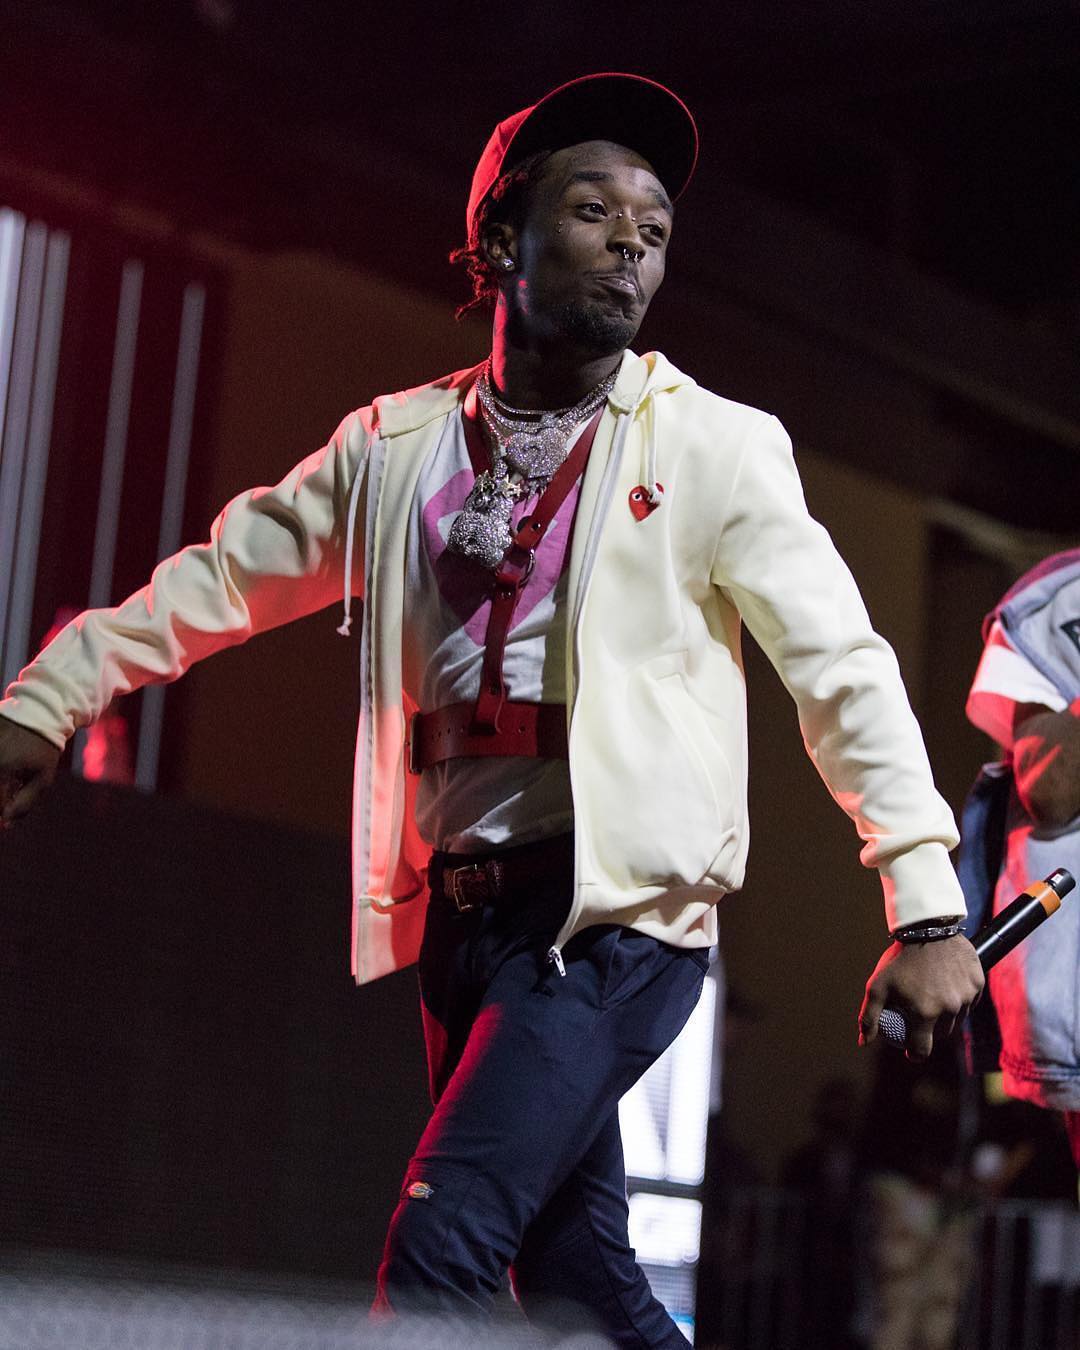 SPOTTED: Lil Uzi Vert Performs at ComplexCon Rockin’ Comme des Garçons and Dickies